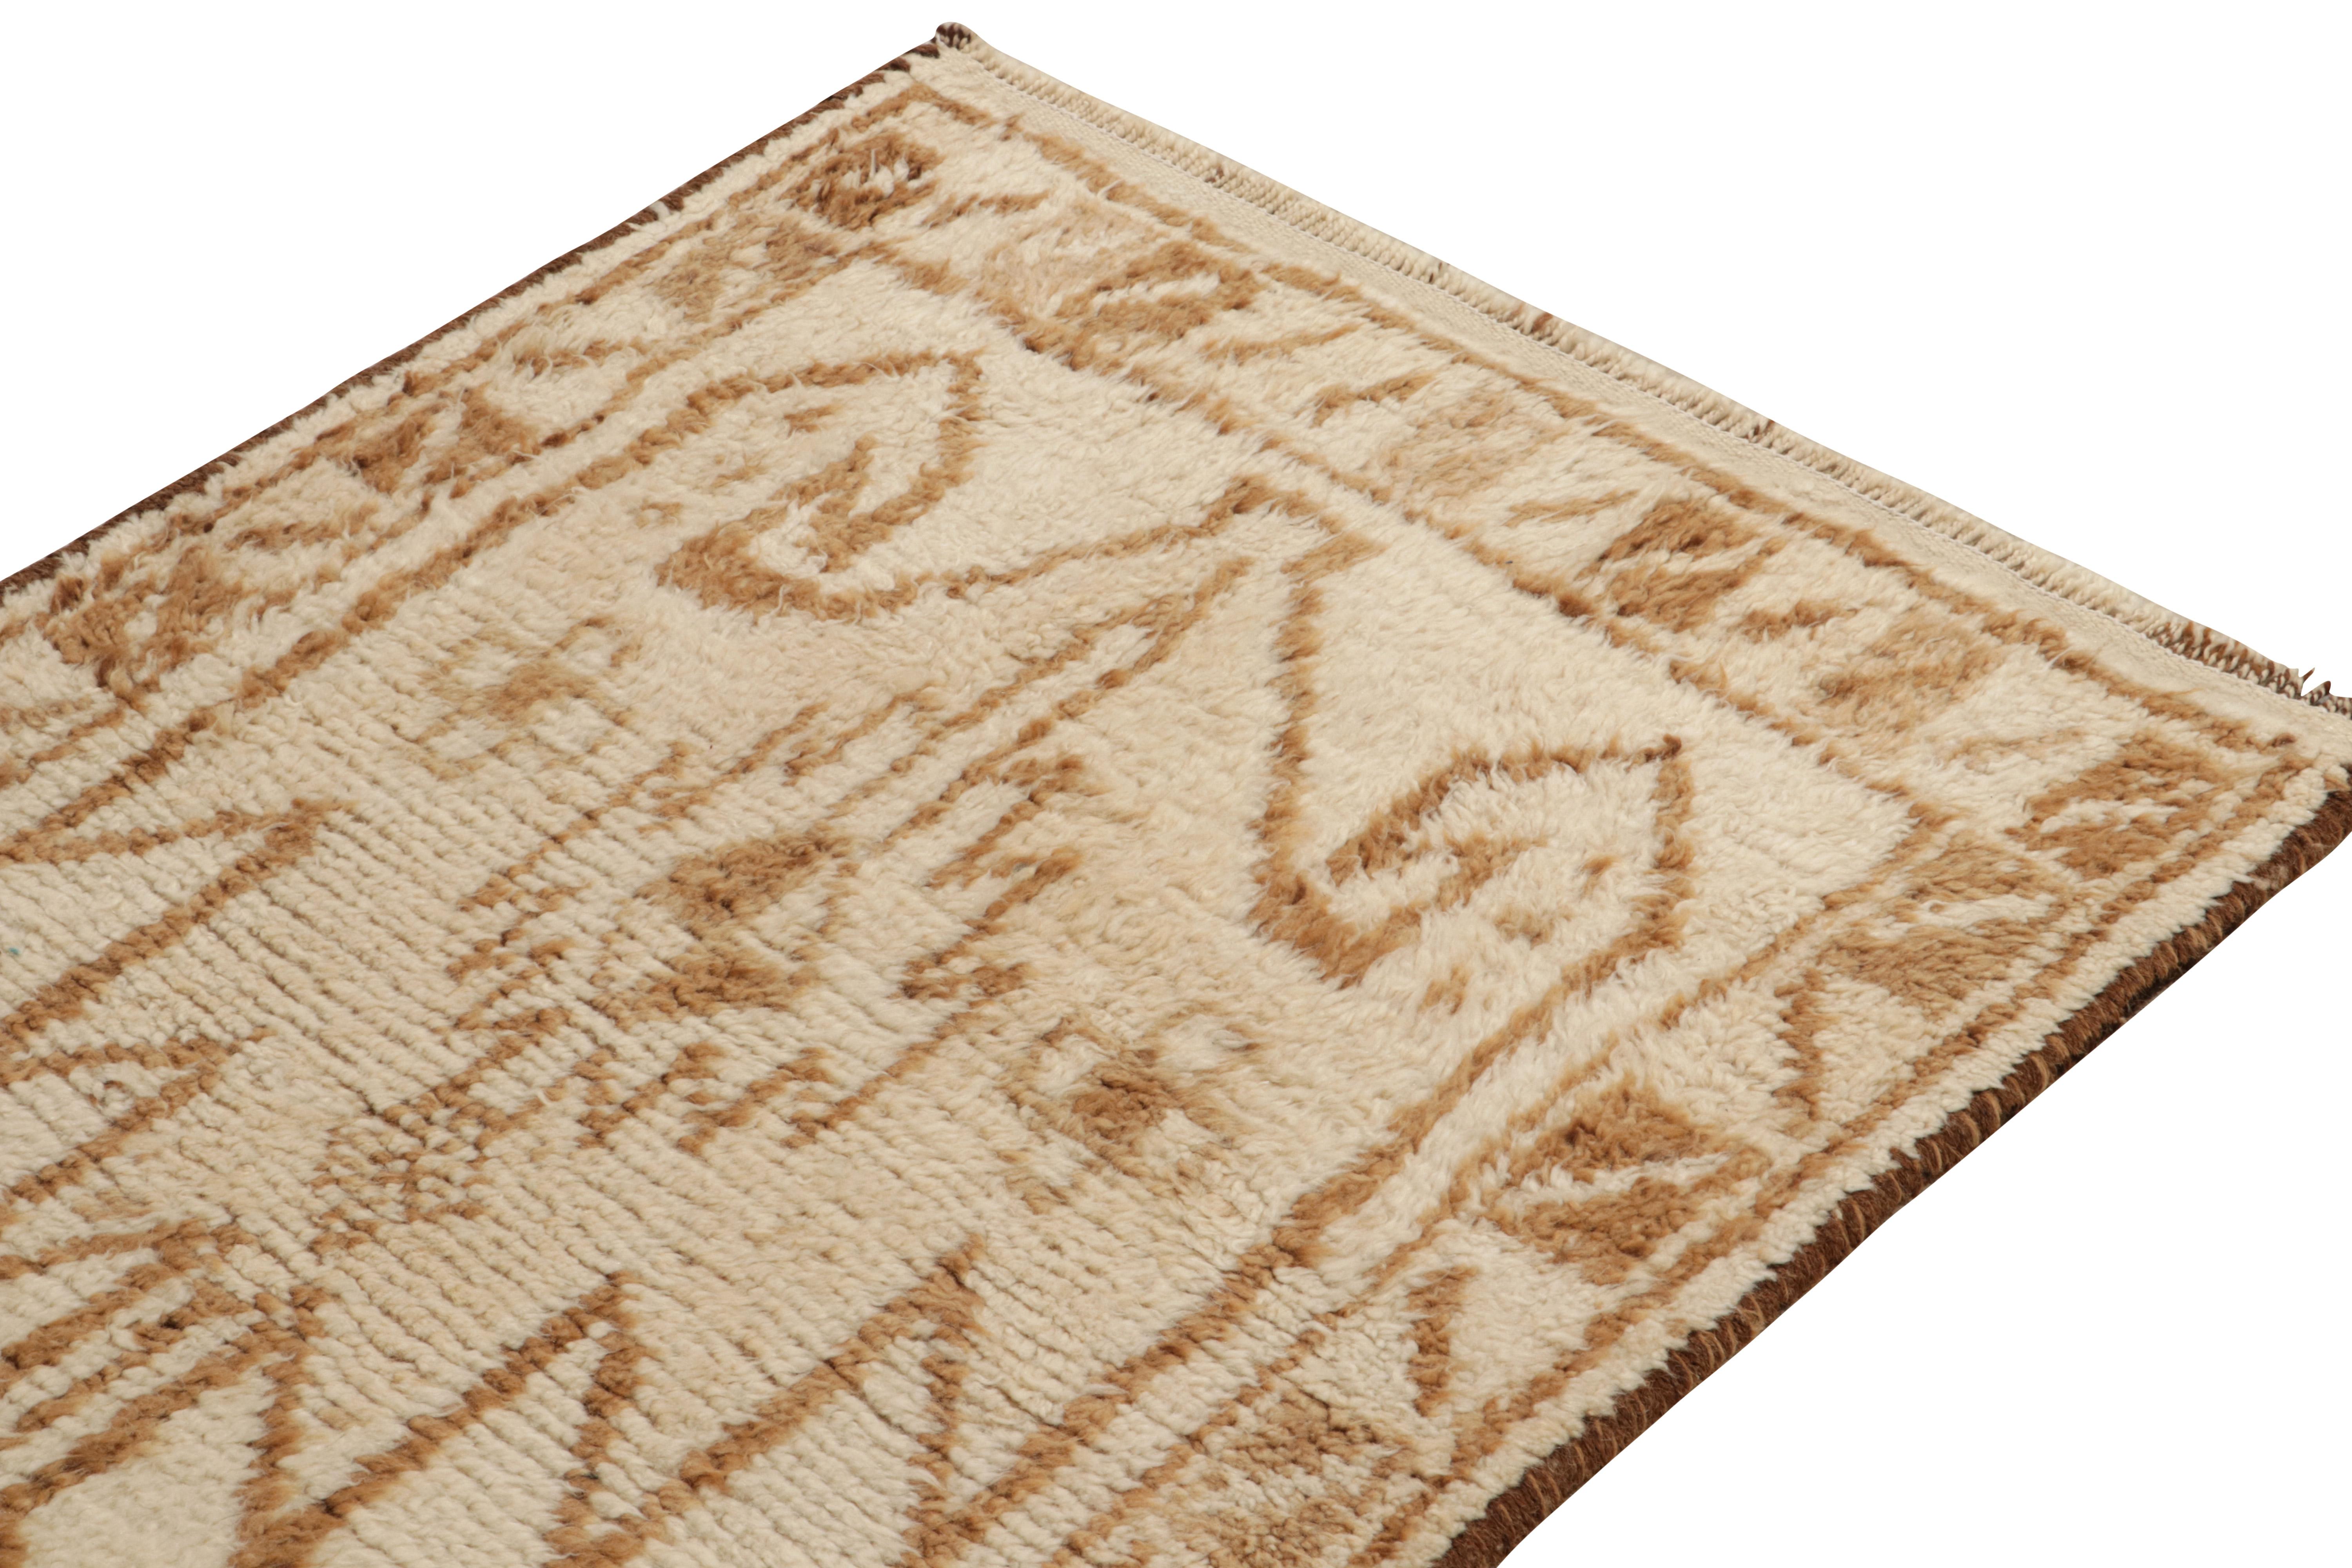 Hand-Knotted Vintage Tribal Runner in White & Beige-Brown Geometric Patterns, by Rug & Kilim